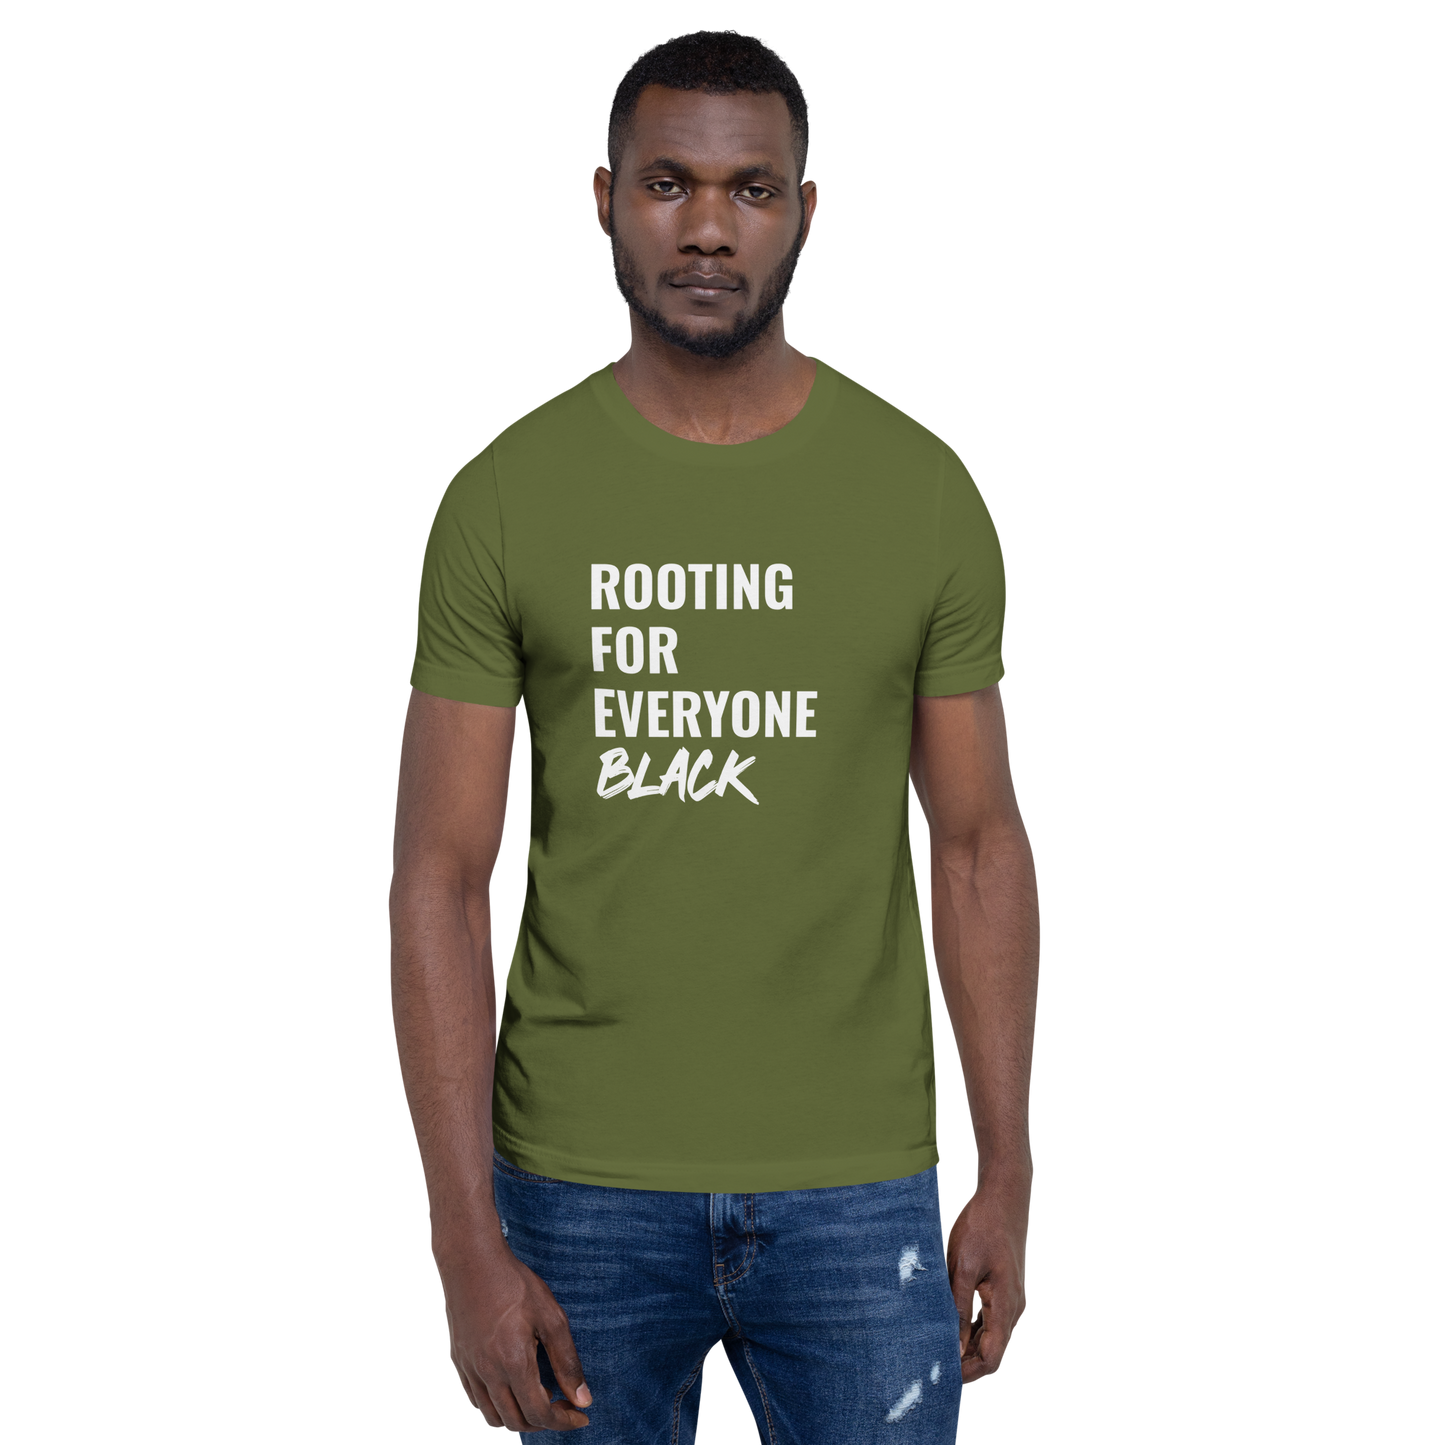 Rooting For Everyone Black Unisex T-shirt